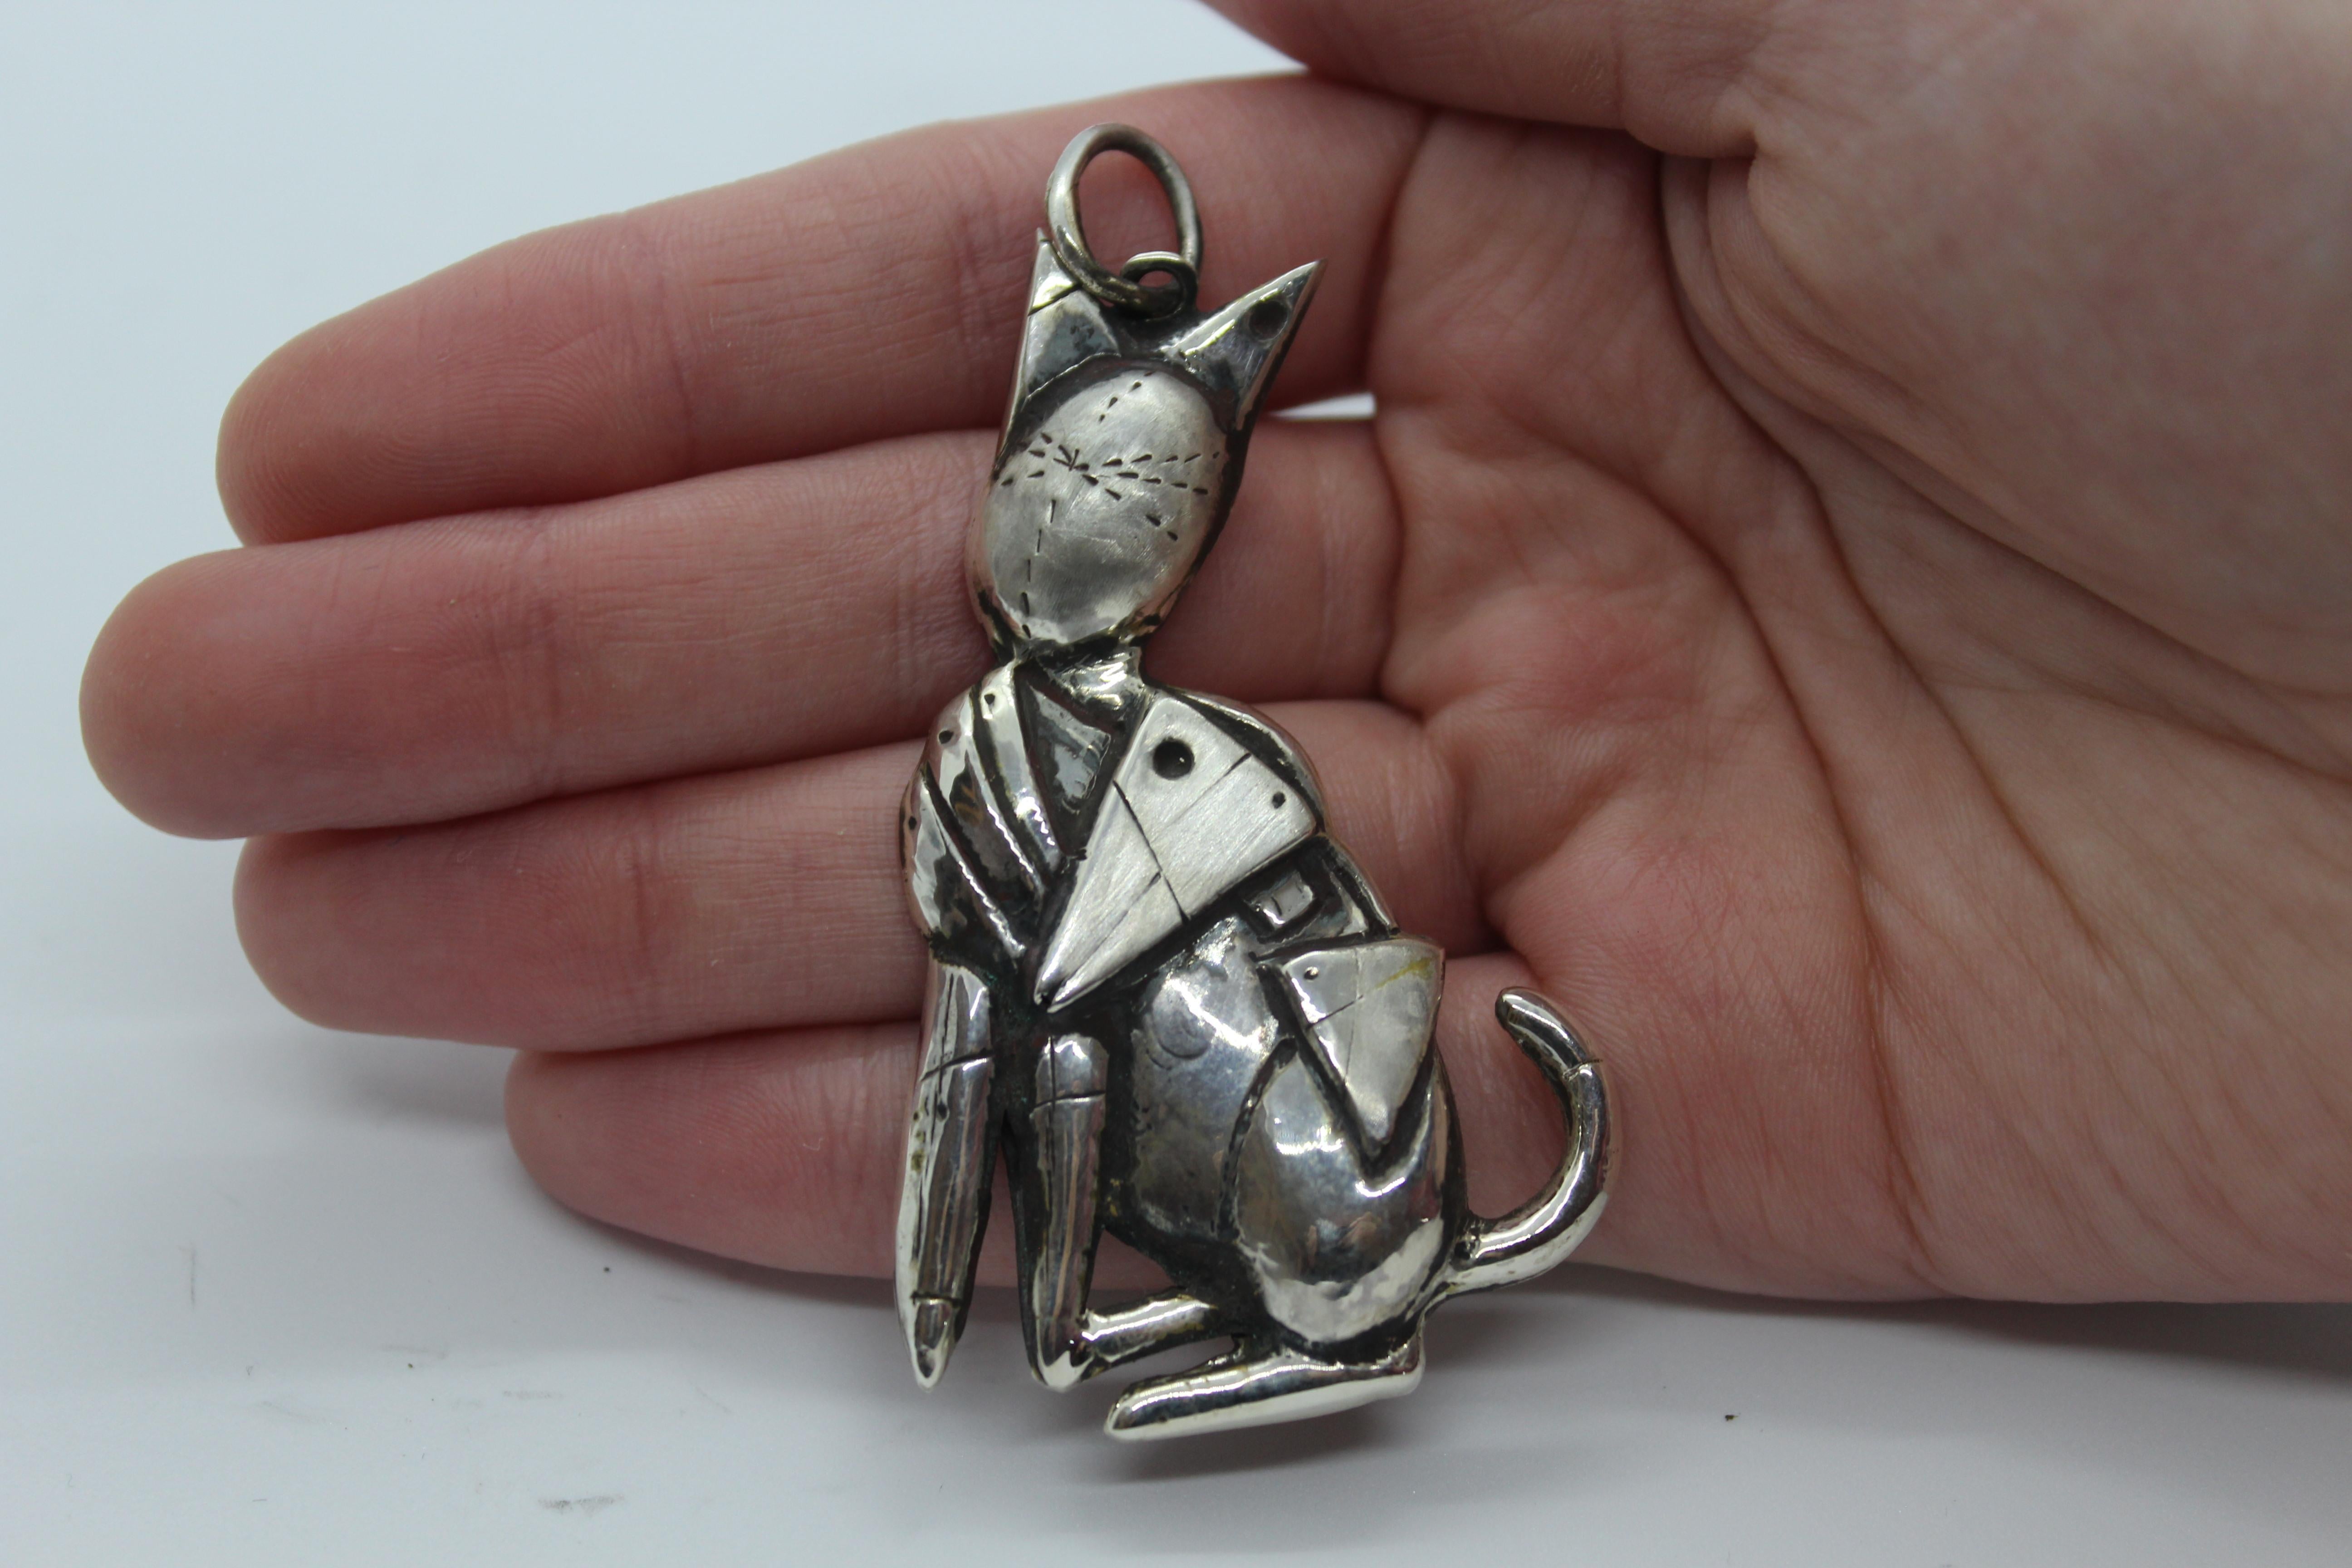 The “De Chirico” pendant is part of our jewelry line “Homage to the ancestors”, inspired by famous oeuvres of great artists. Specifically, this pendant represents the well- known Cat of De Chirico. All our sterling silver pieces of jewelry are